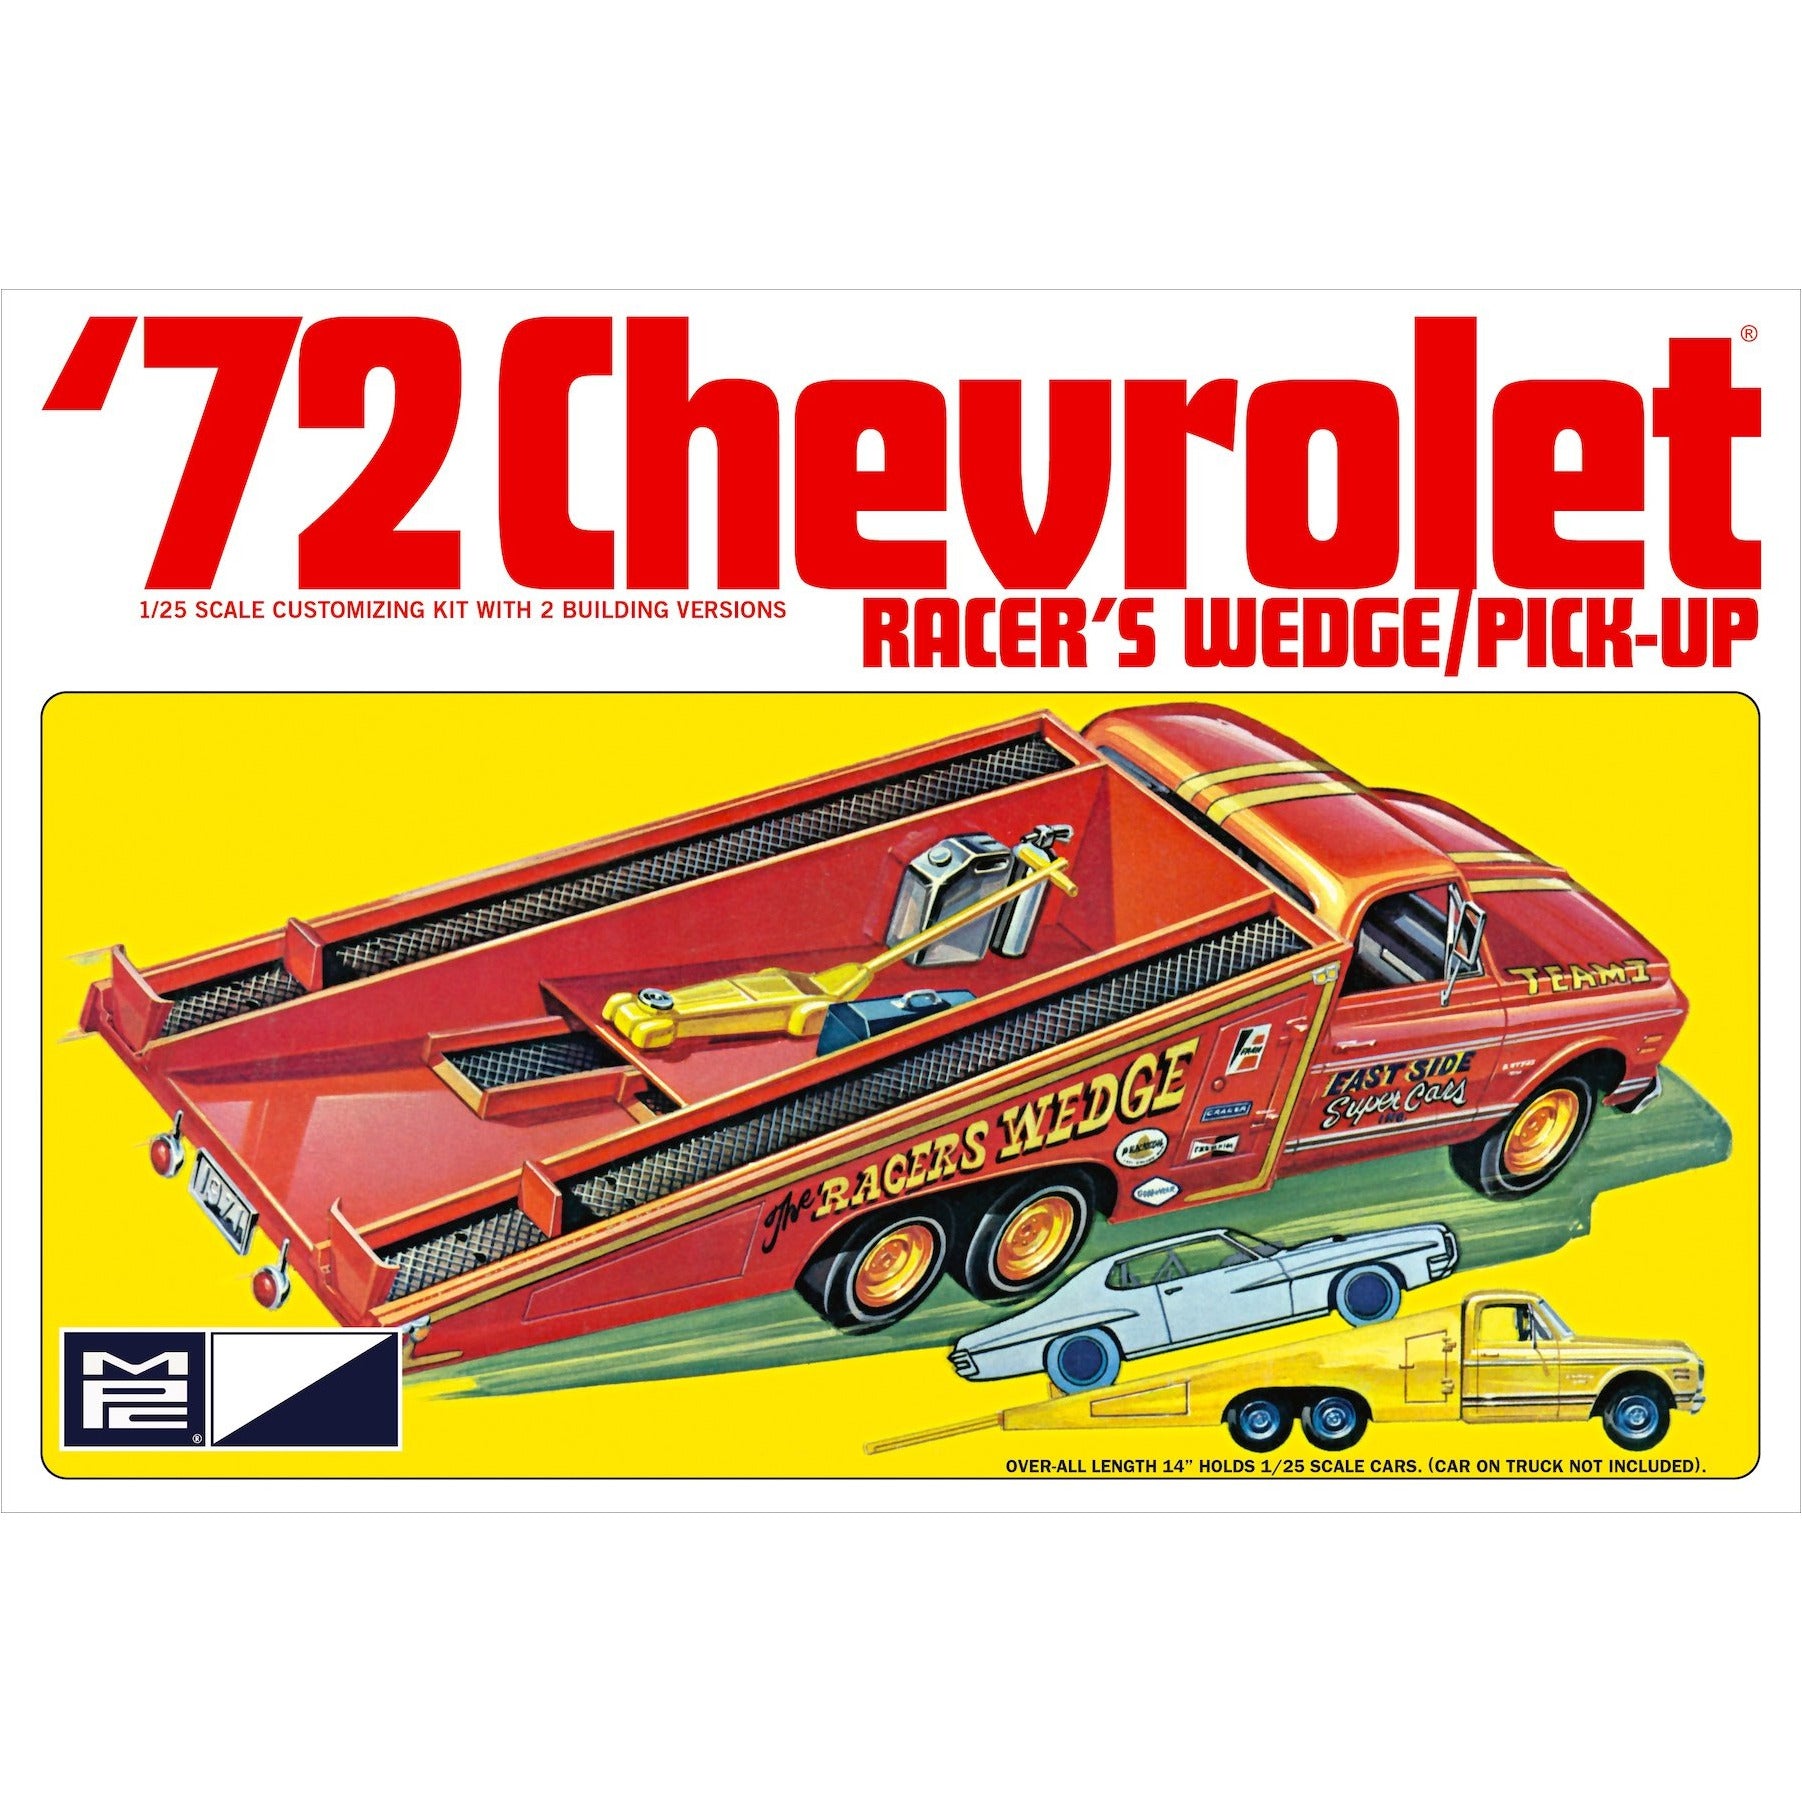 1972 Chevrolet Racer's  1/25 #885 by MPC Wedge/Pick-up